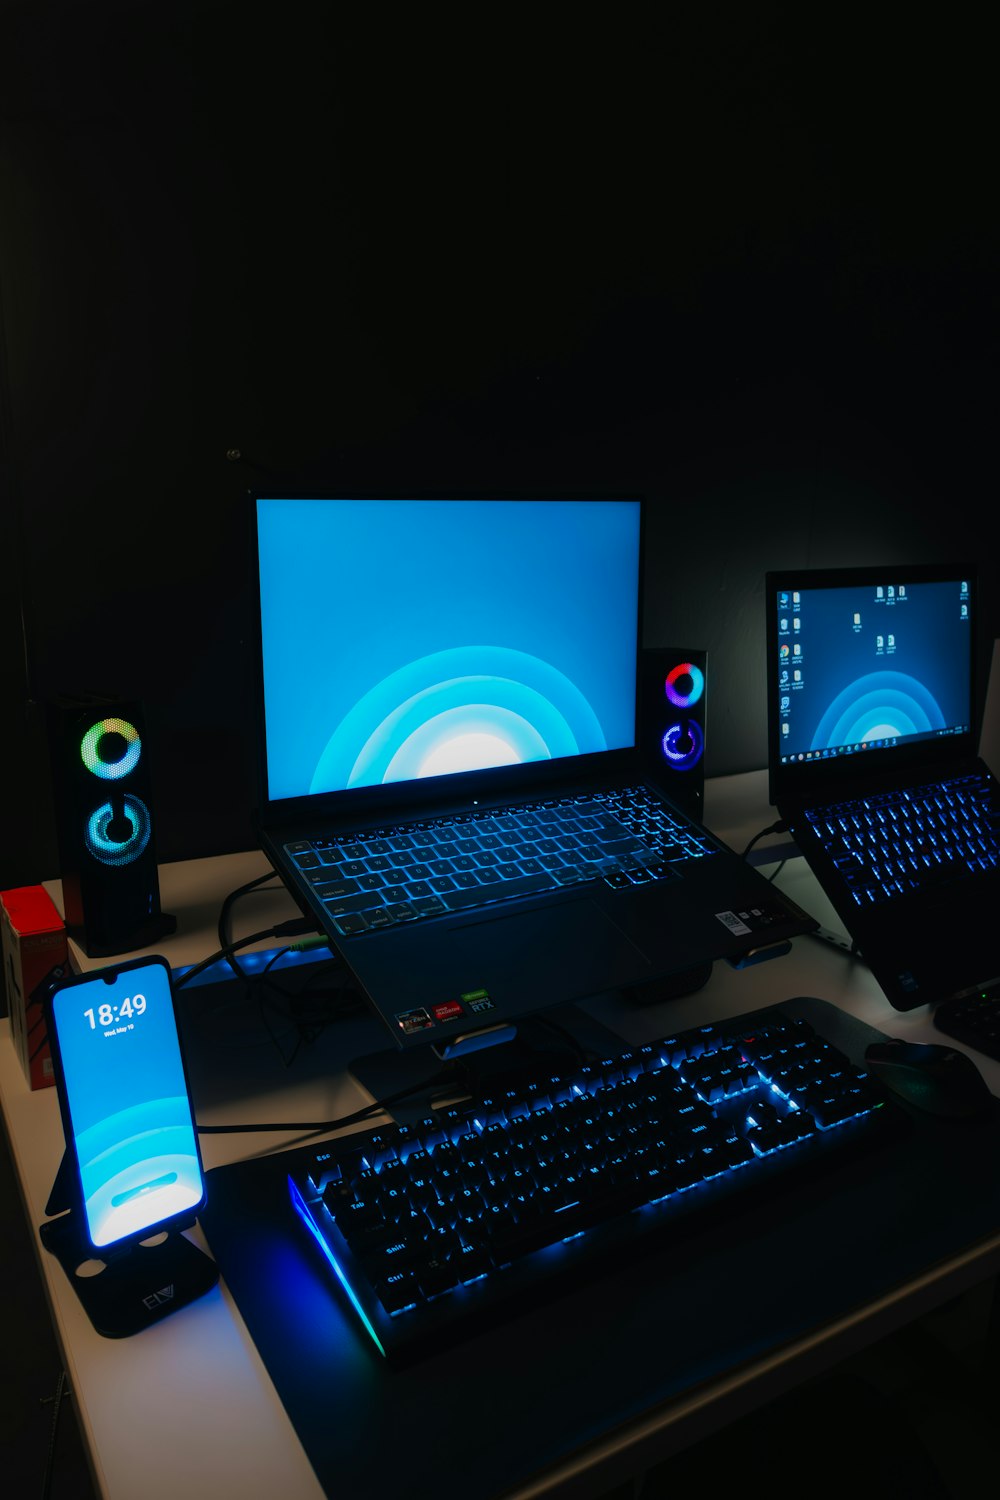 a desk with a laptop, monitor, keyboard and cell phone on it